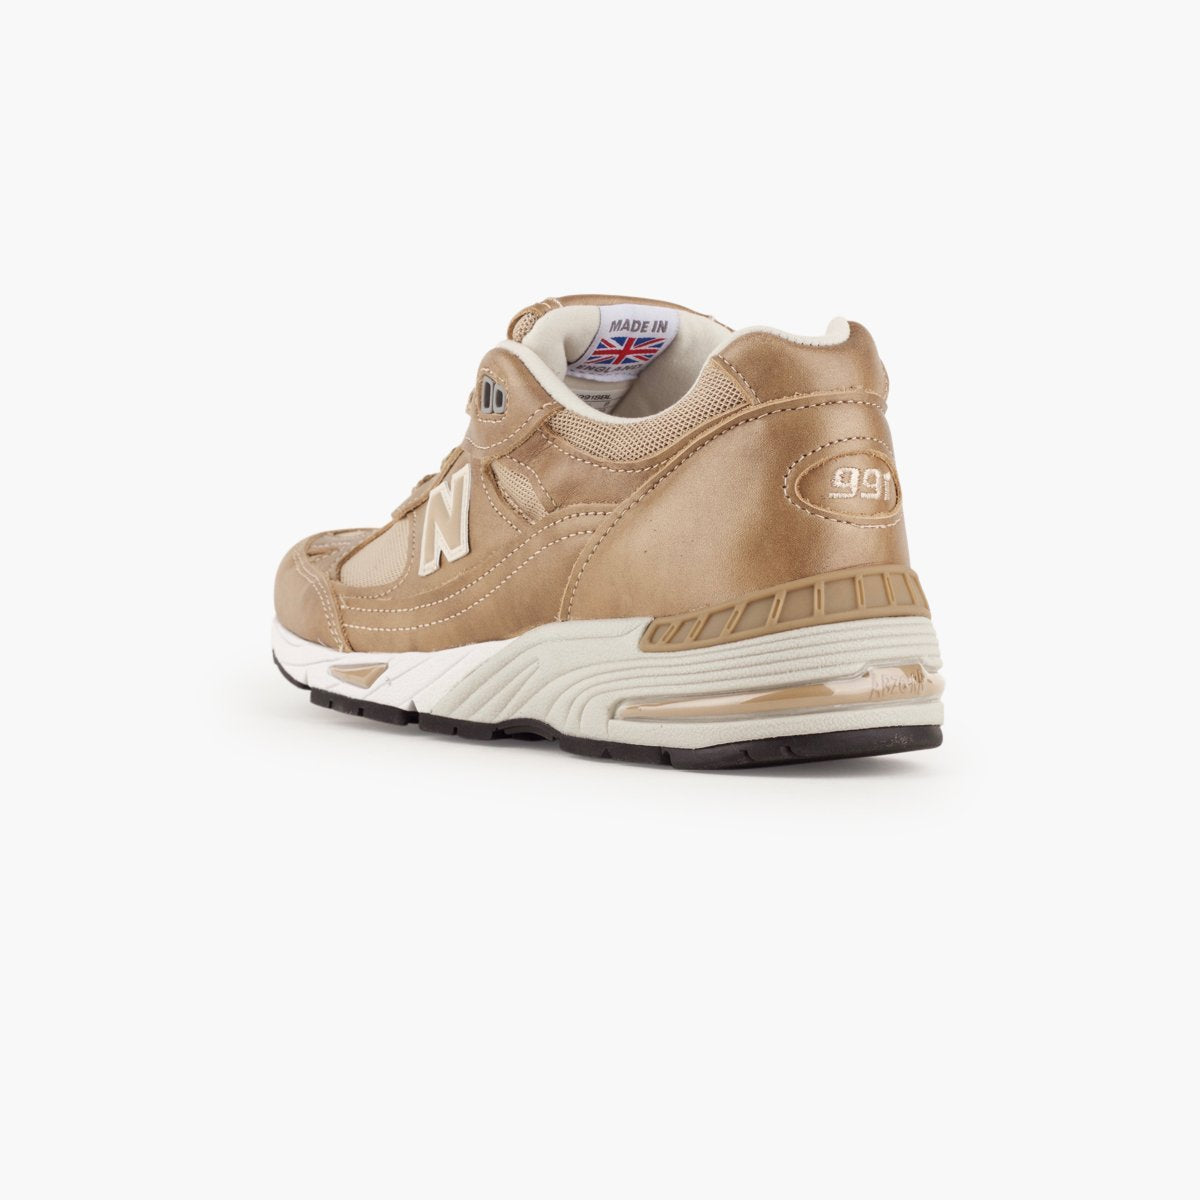 New Balance 991 Women's-SUEDE Store